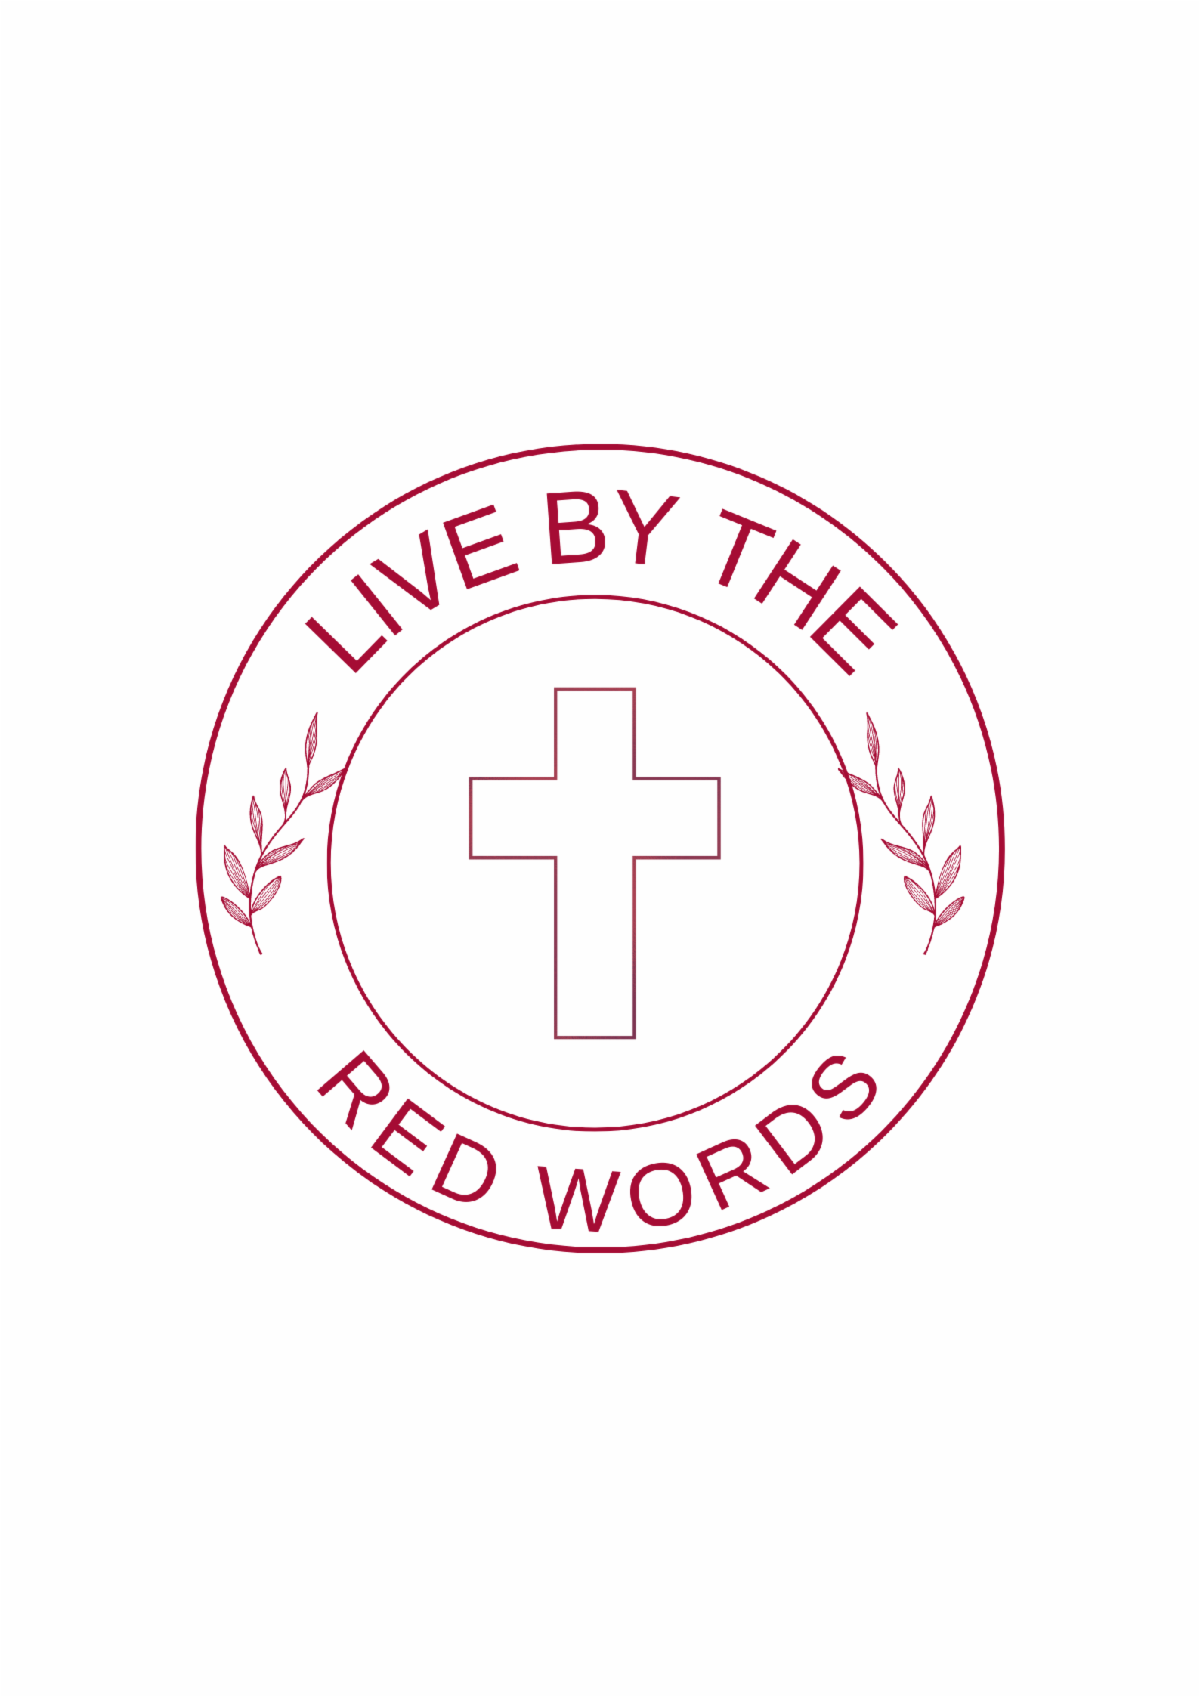 LIVE BY THE RED WORDS